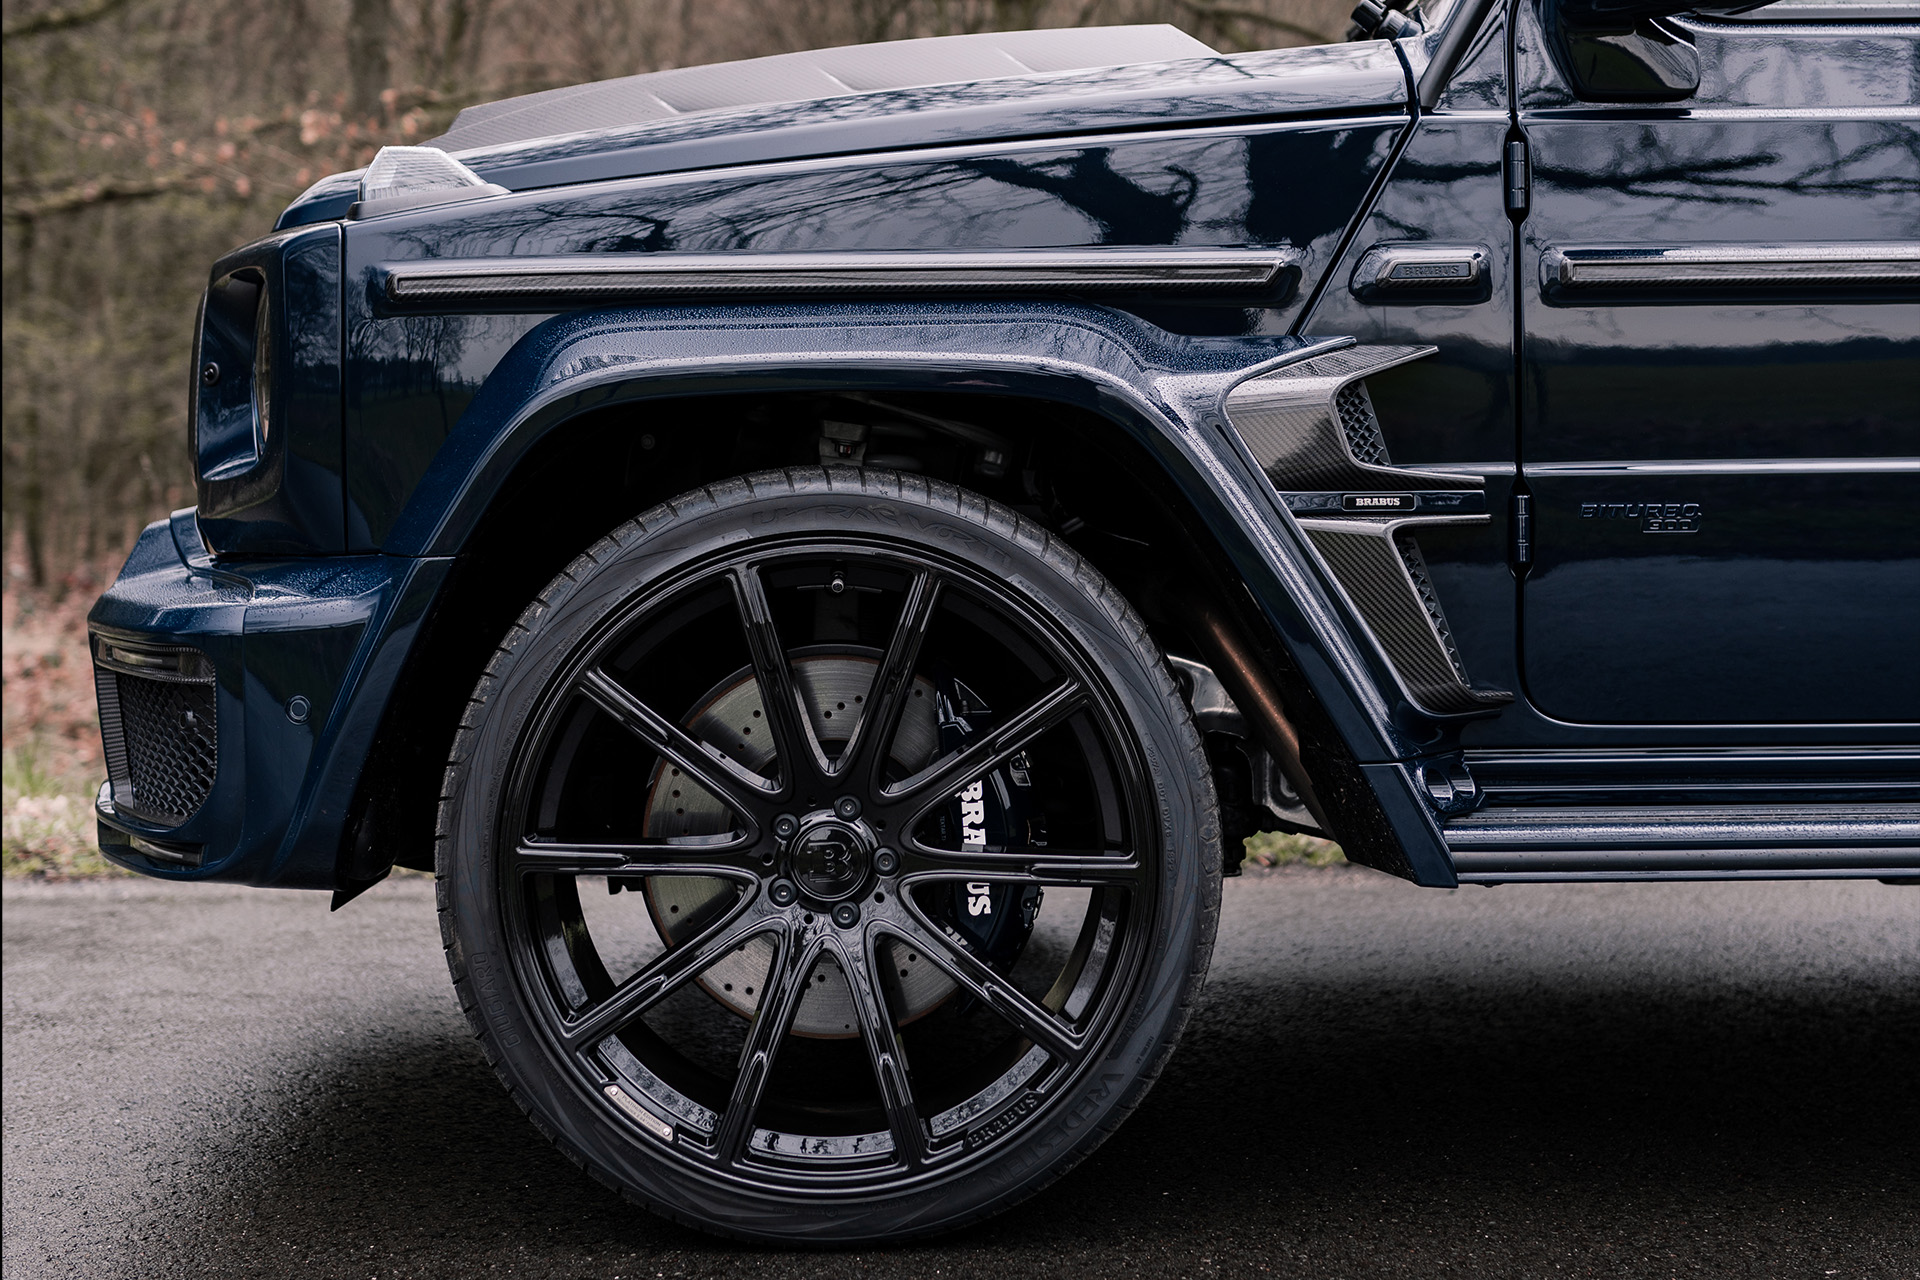 Brabus showcases the Mercedes-AMG G63 in the stunning 900 Deep Blue variant